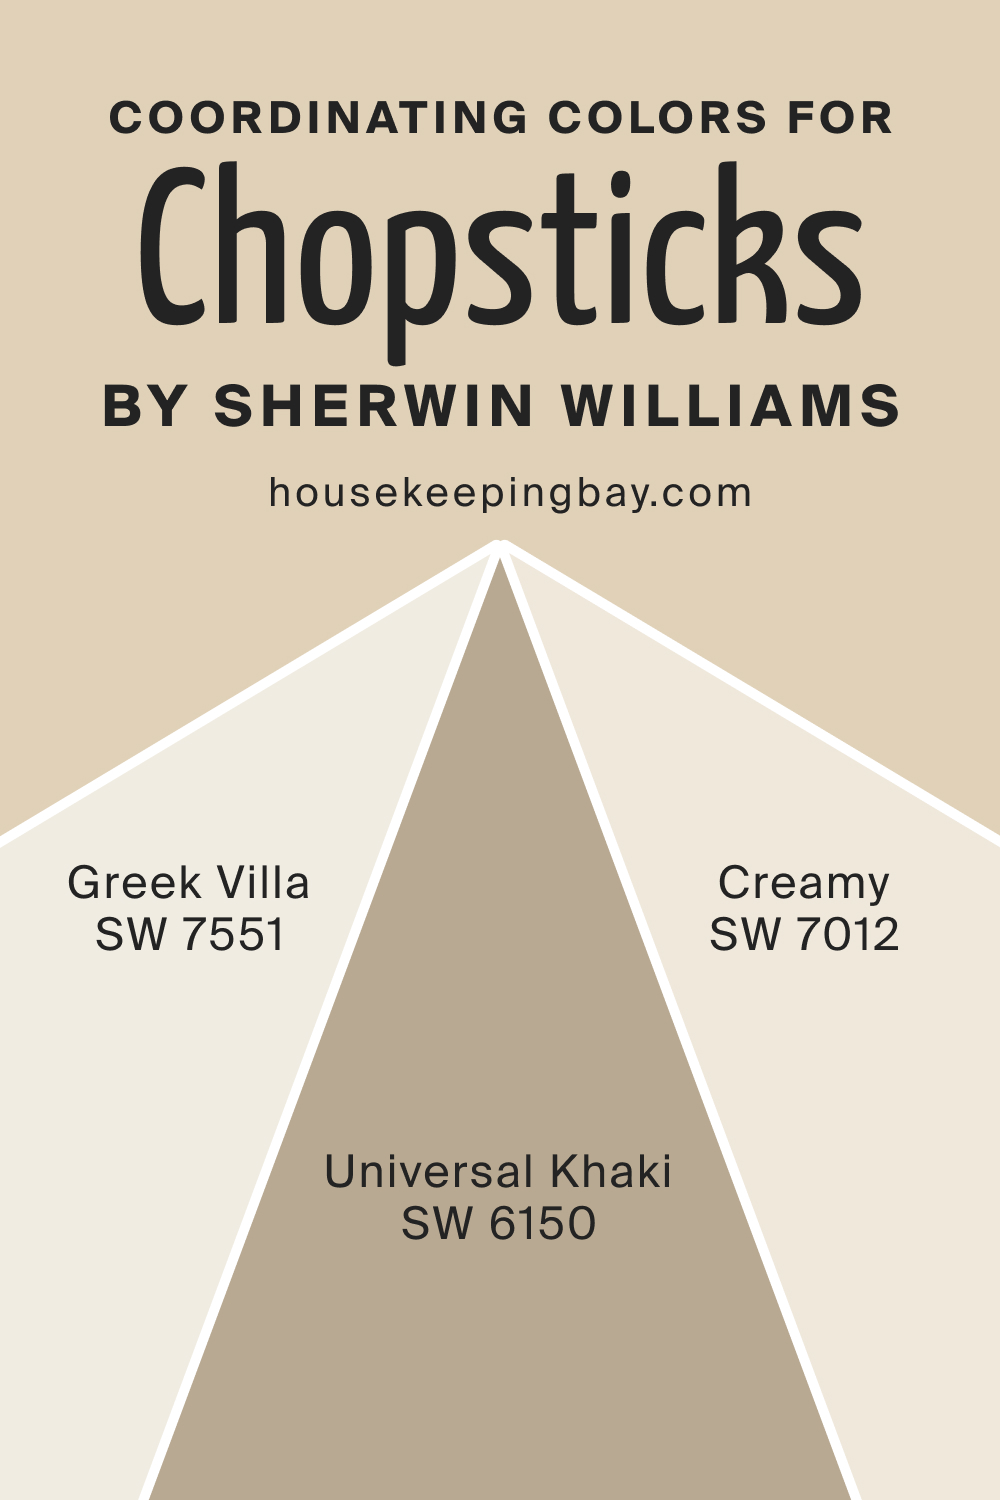 Coordinating Colors for SW Chopsticks by Sherwin Williams